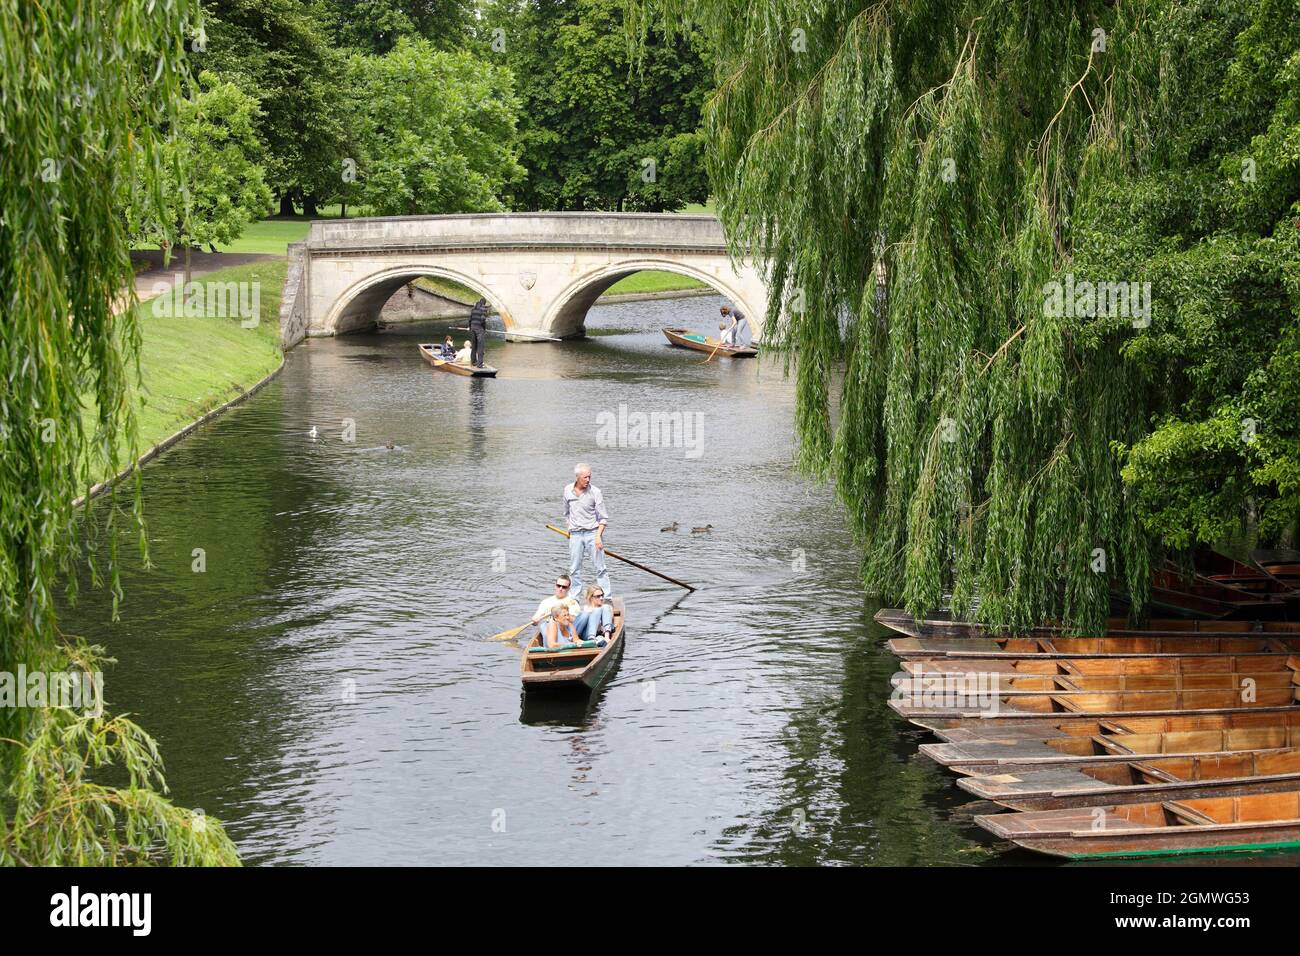 Cambridge, Cambridgeshire - 20 July 2009; Group of people in view, having fun. A quintessentially English pursuit on a fine summer's day -  punting on Stock Photo